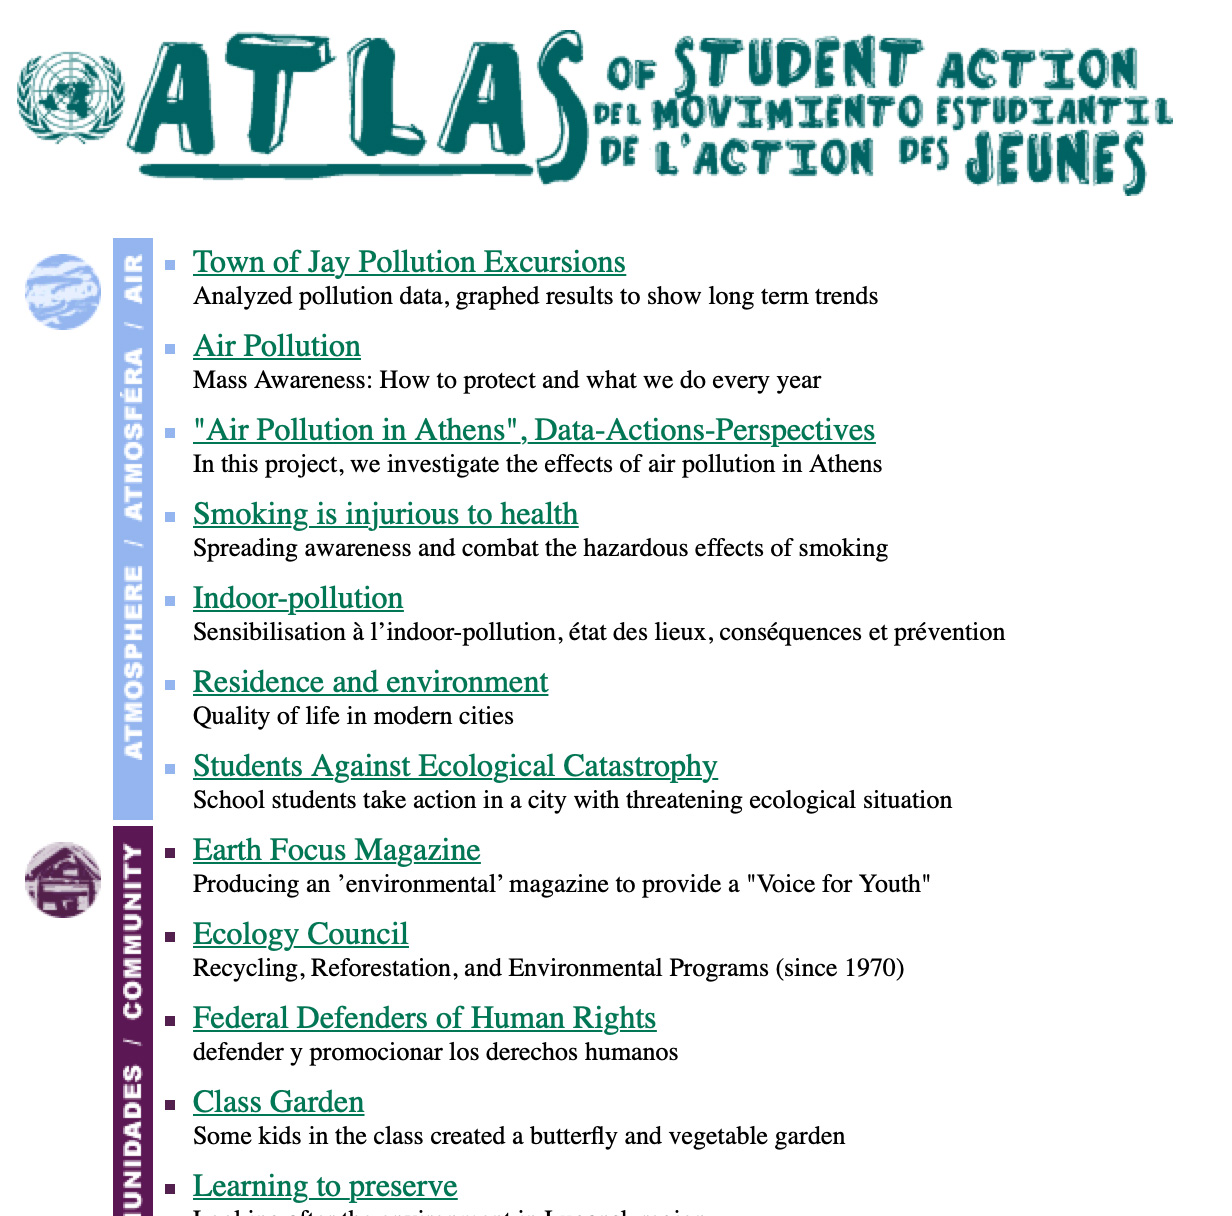 Atlas of Student Action for the Planet project list